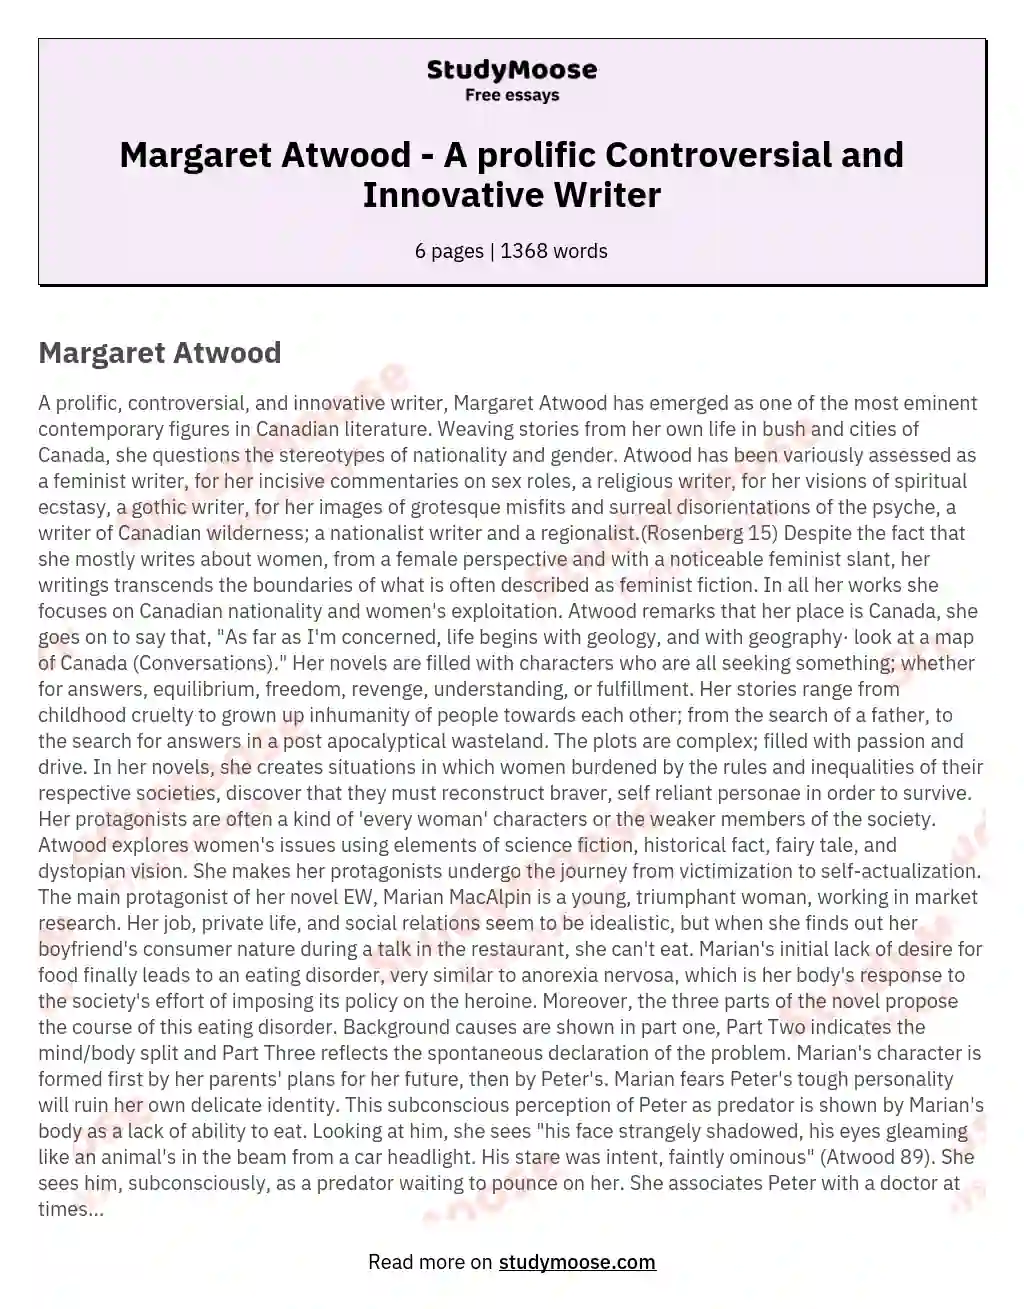 Margaret Atwood - A prolific Controversial and Innovative Writer essay